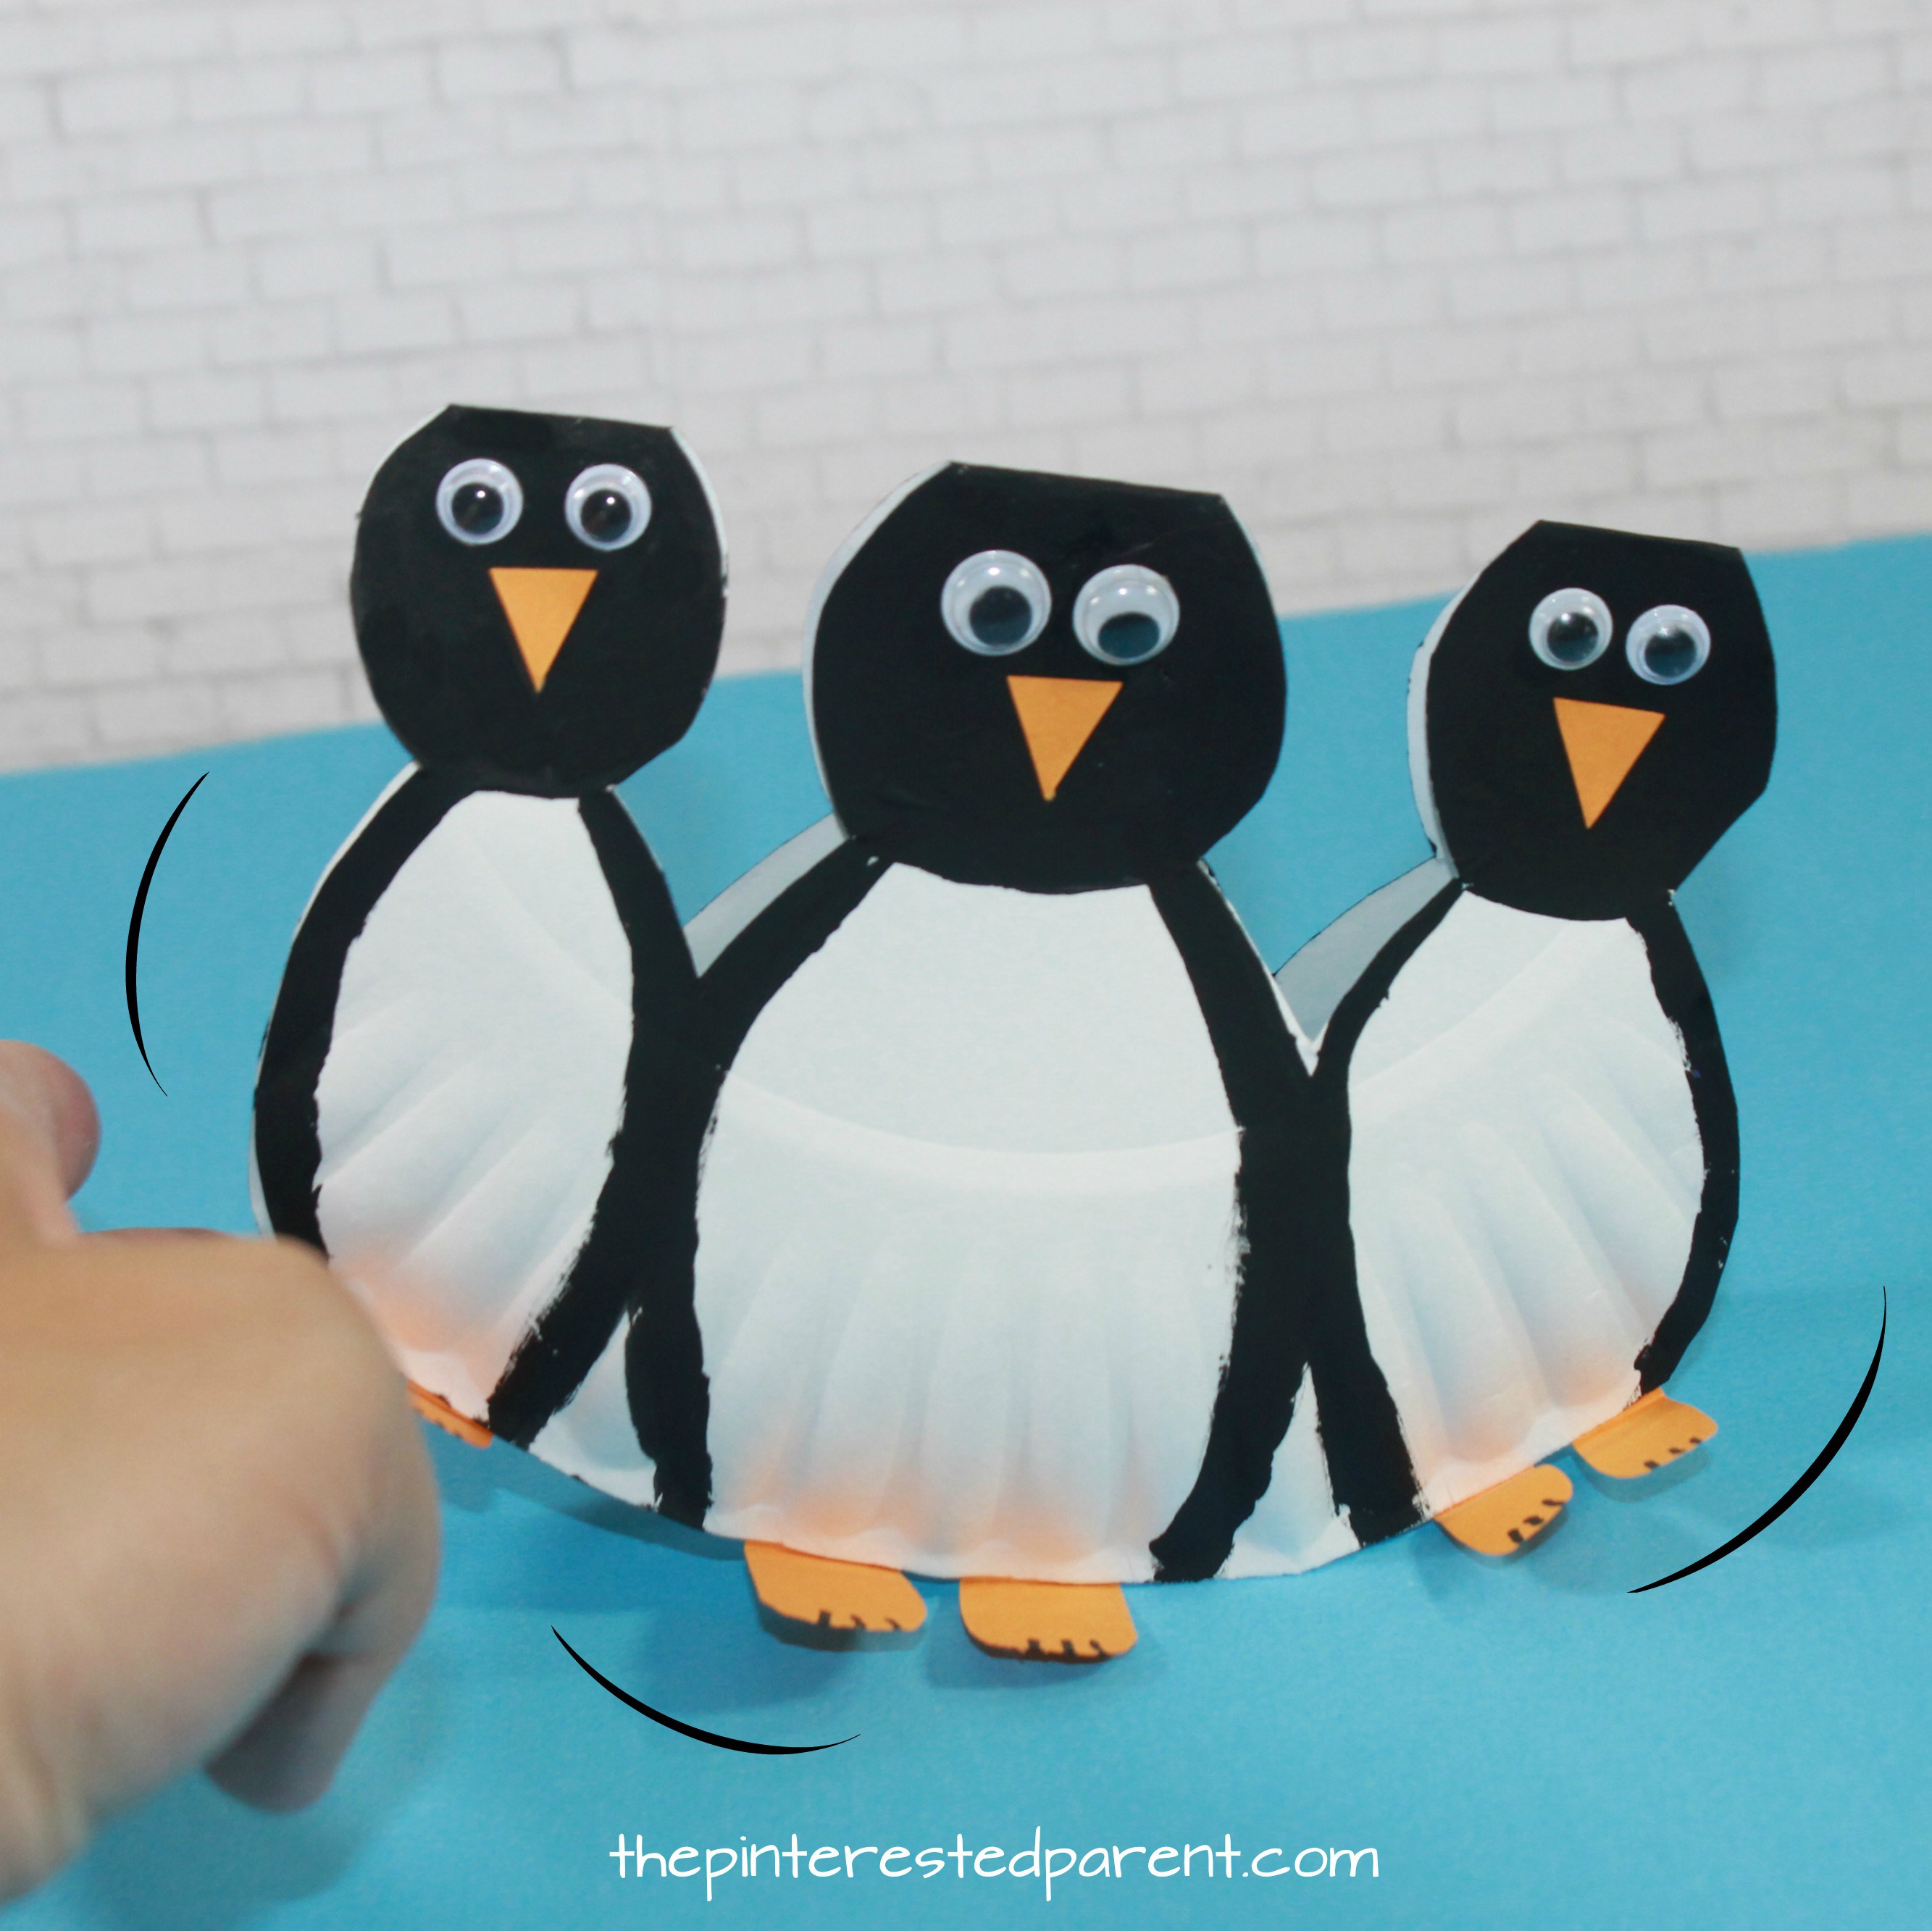 Rocking Paper Plate Penguins – The Pinterested Parent